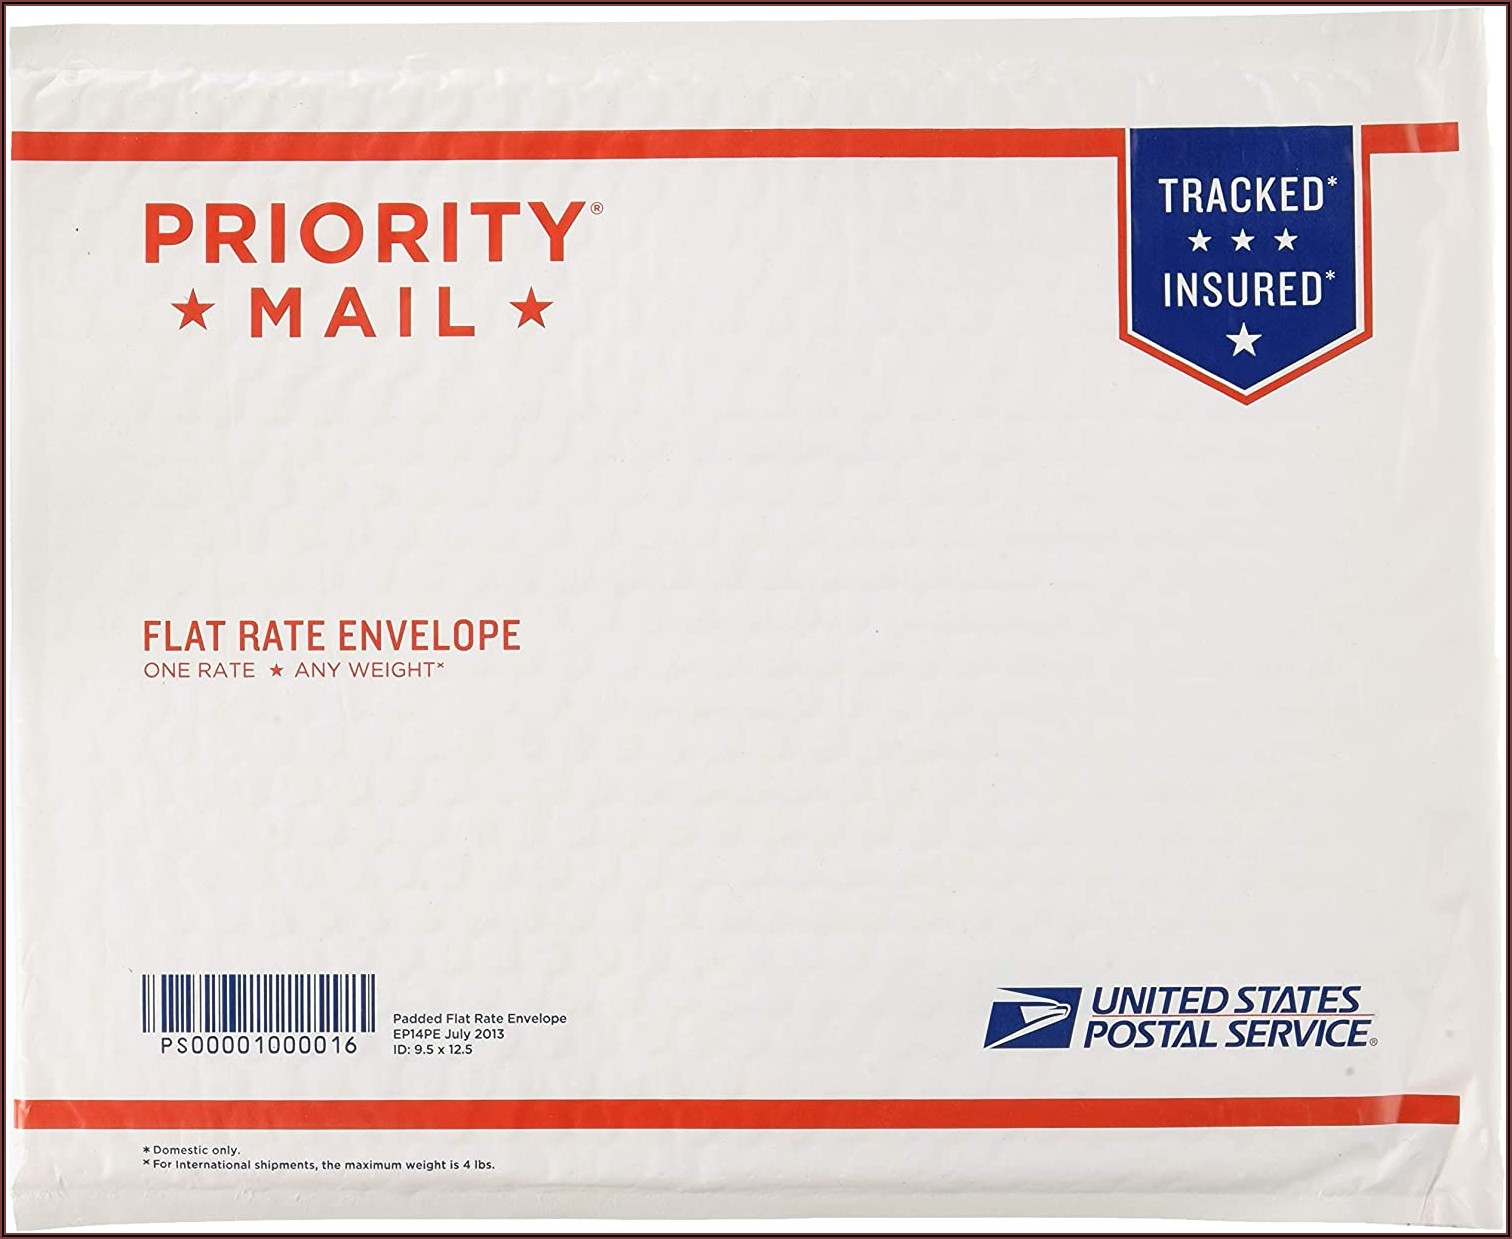 Usps Priority Mail Flat Rate Envelope Cost 2019